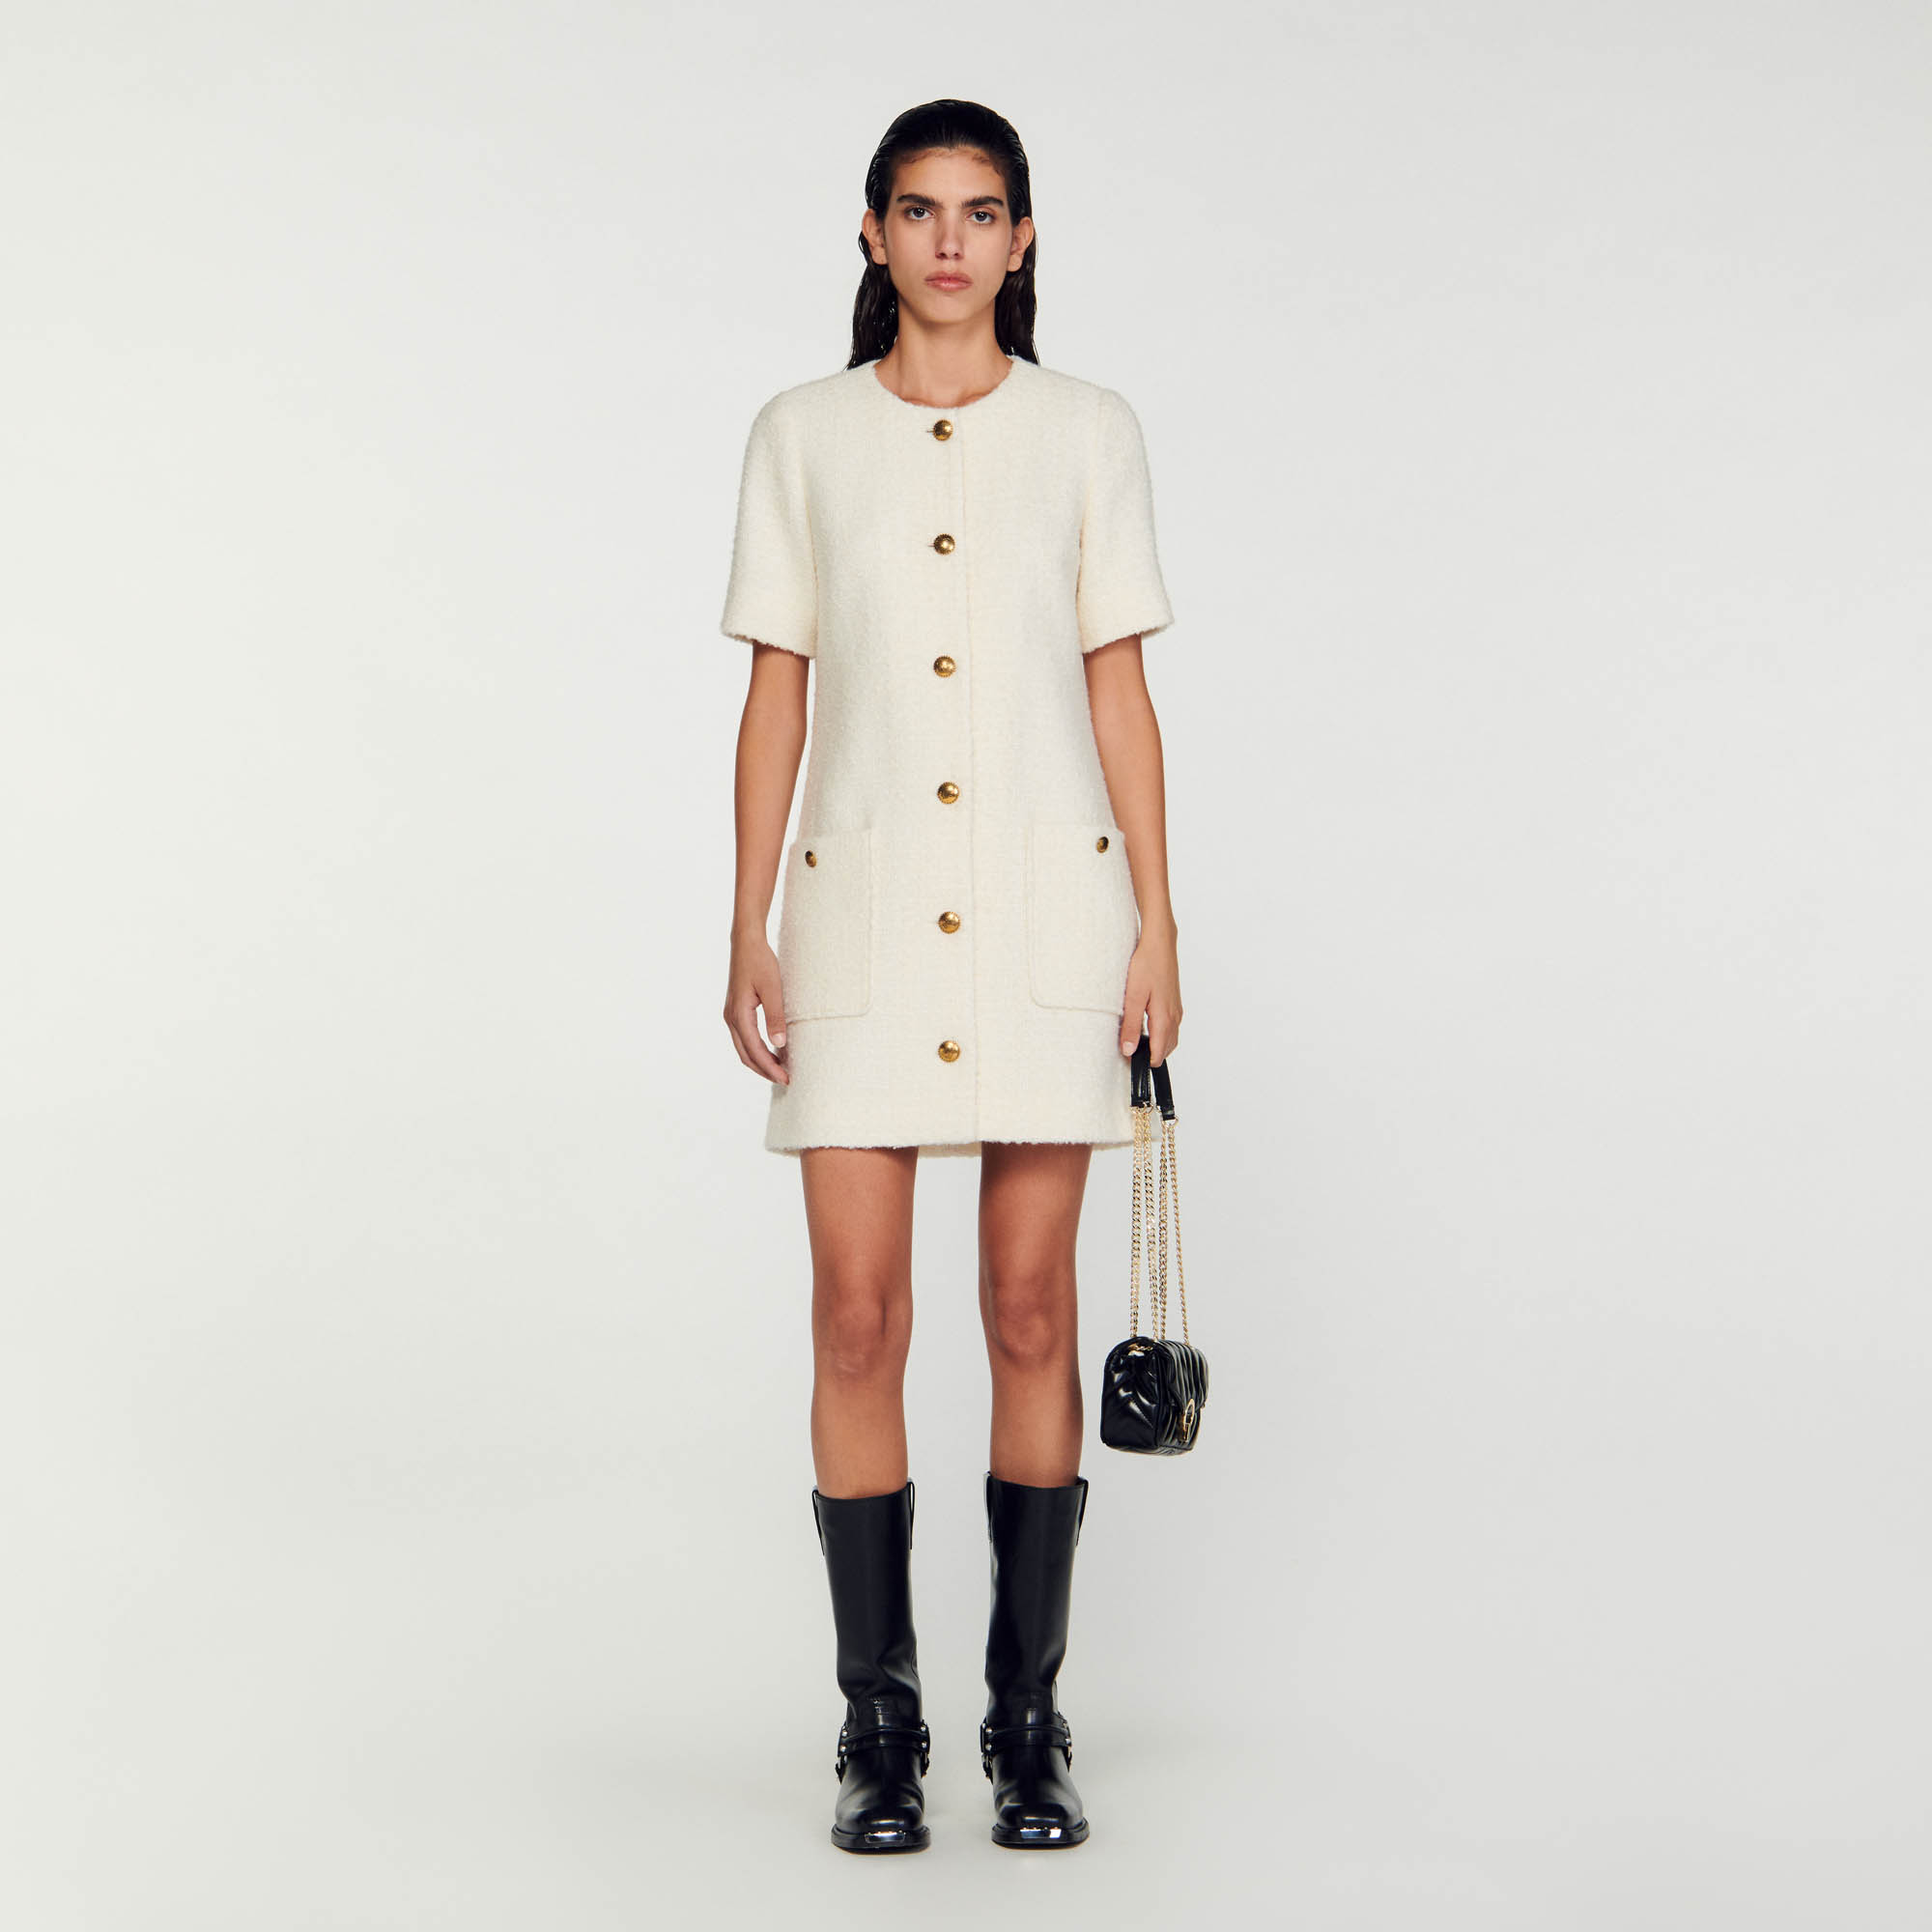 Sandro acrylic Coat-style short tweed dress with round neck, short sleeves and decorative button fastening